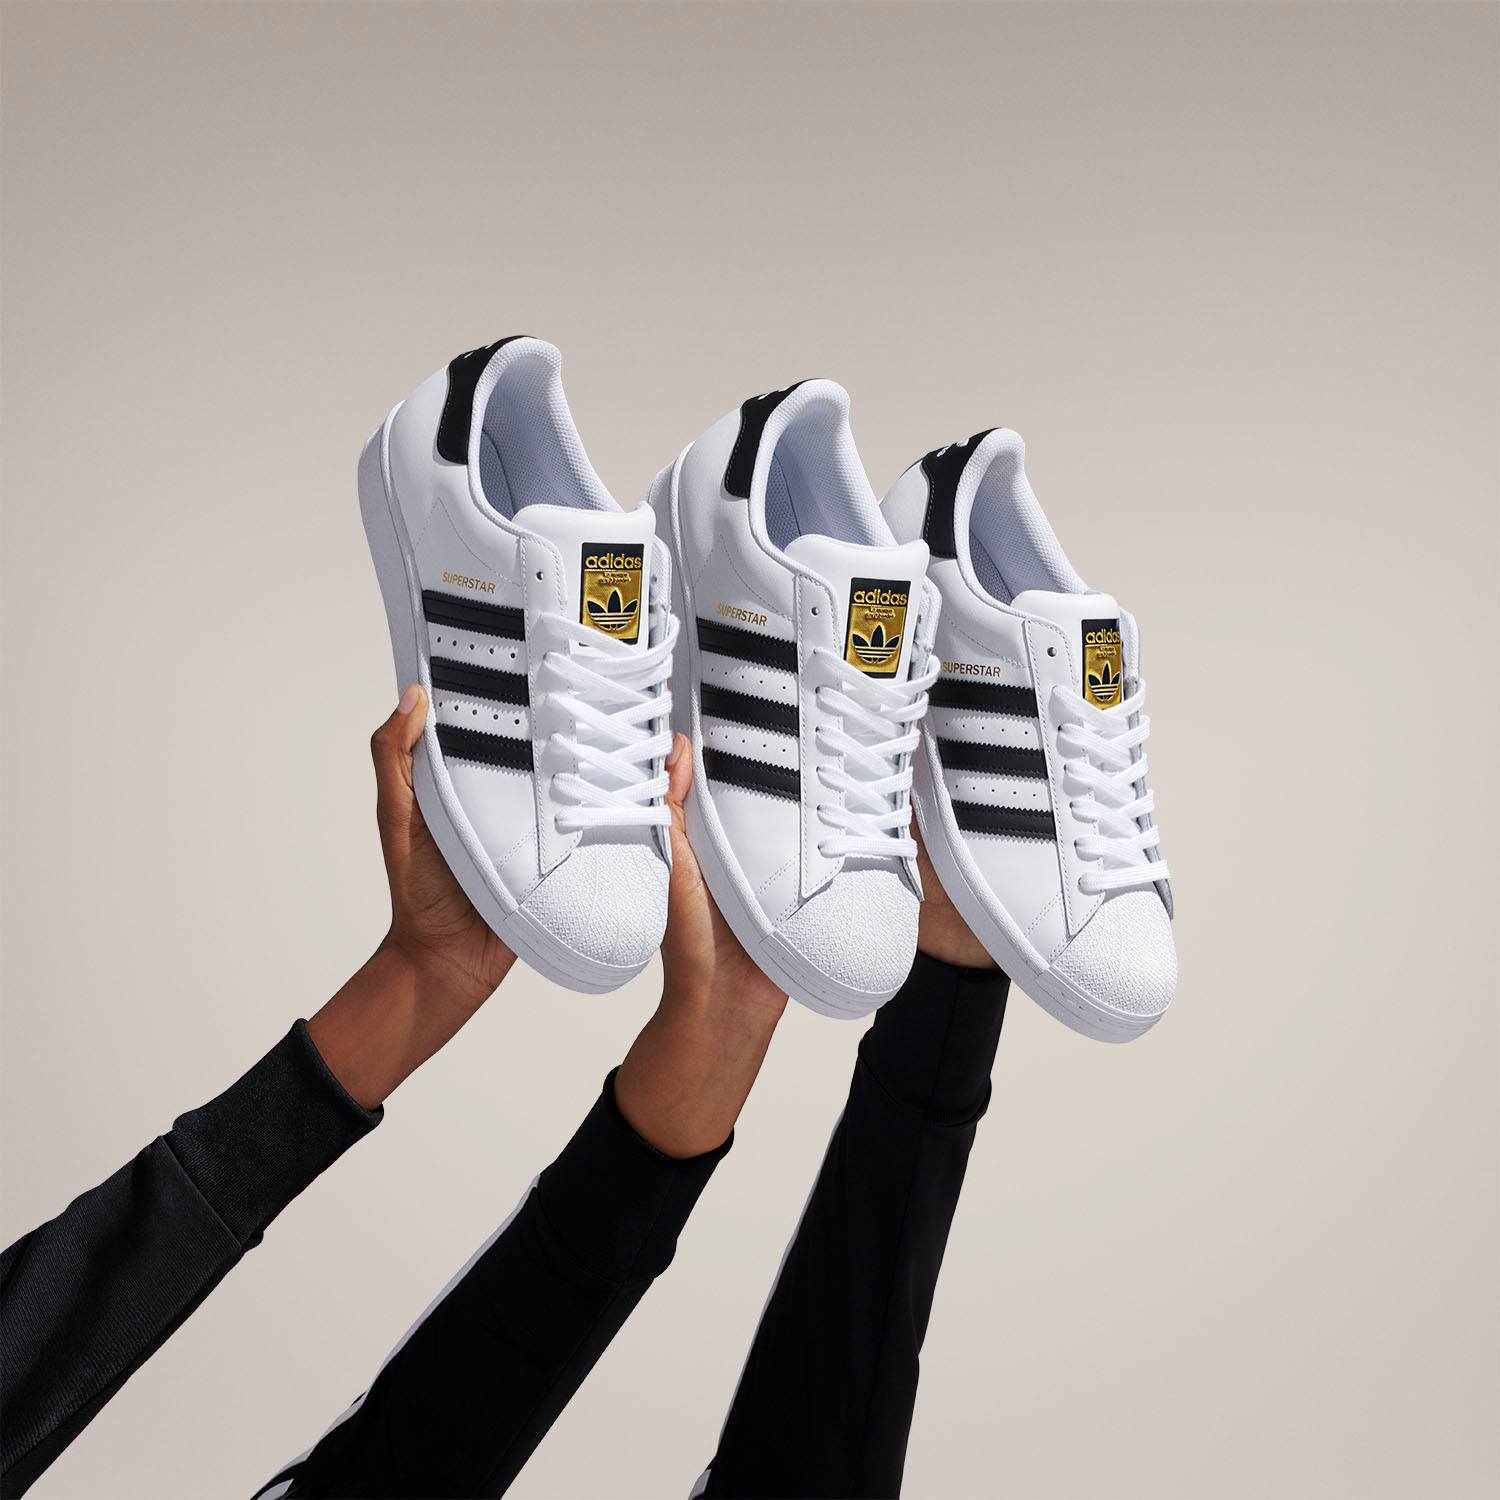 Adidas Canada Black Friday Sale: Save 40% OFF Many Styles Including Hoodies, Sweatpants & Shoes - Canadian Freebies, Coupons, Deals, Bargains, Contests Canada Canadian Freebies, Coupons, Deals, Bargains, Flyers, Contests Canada